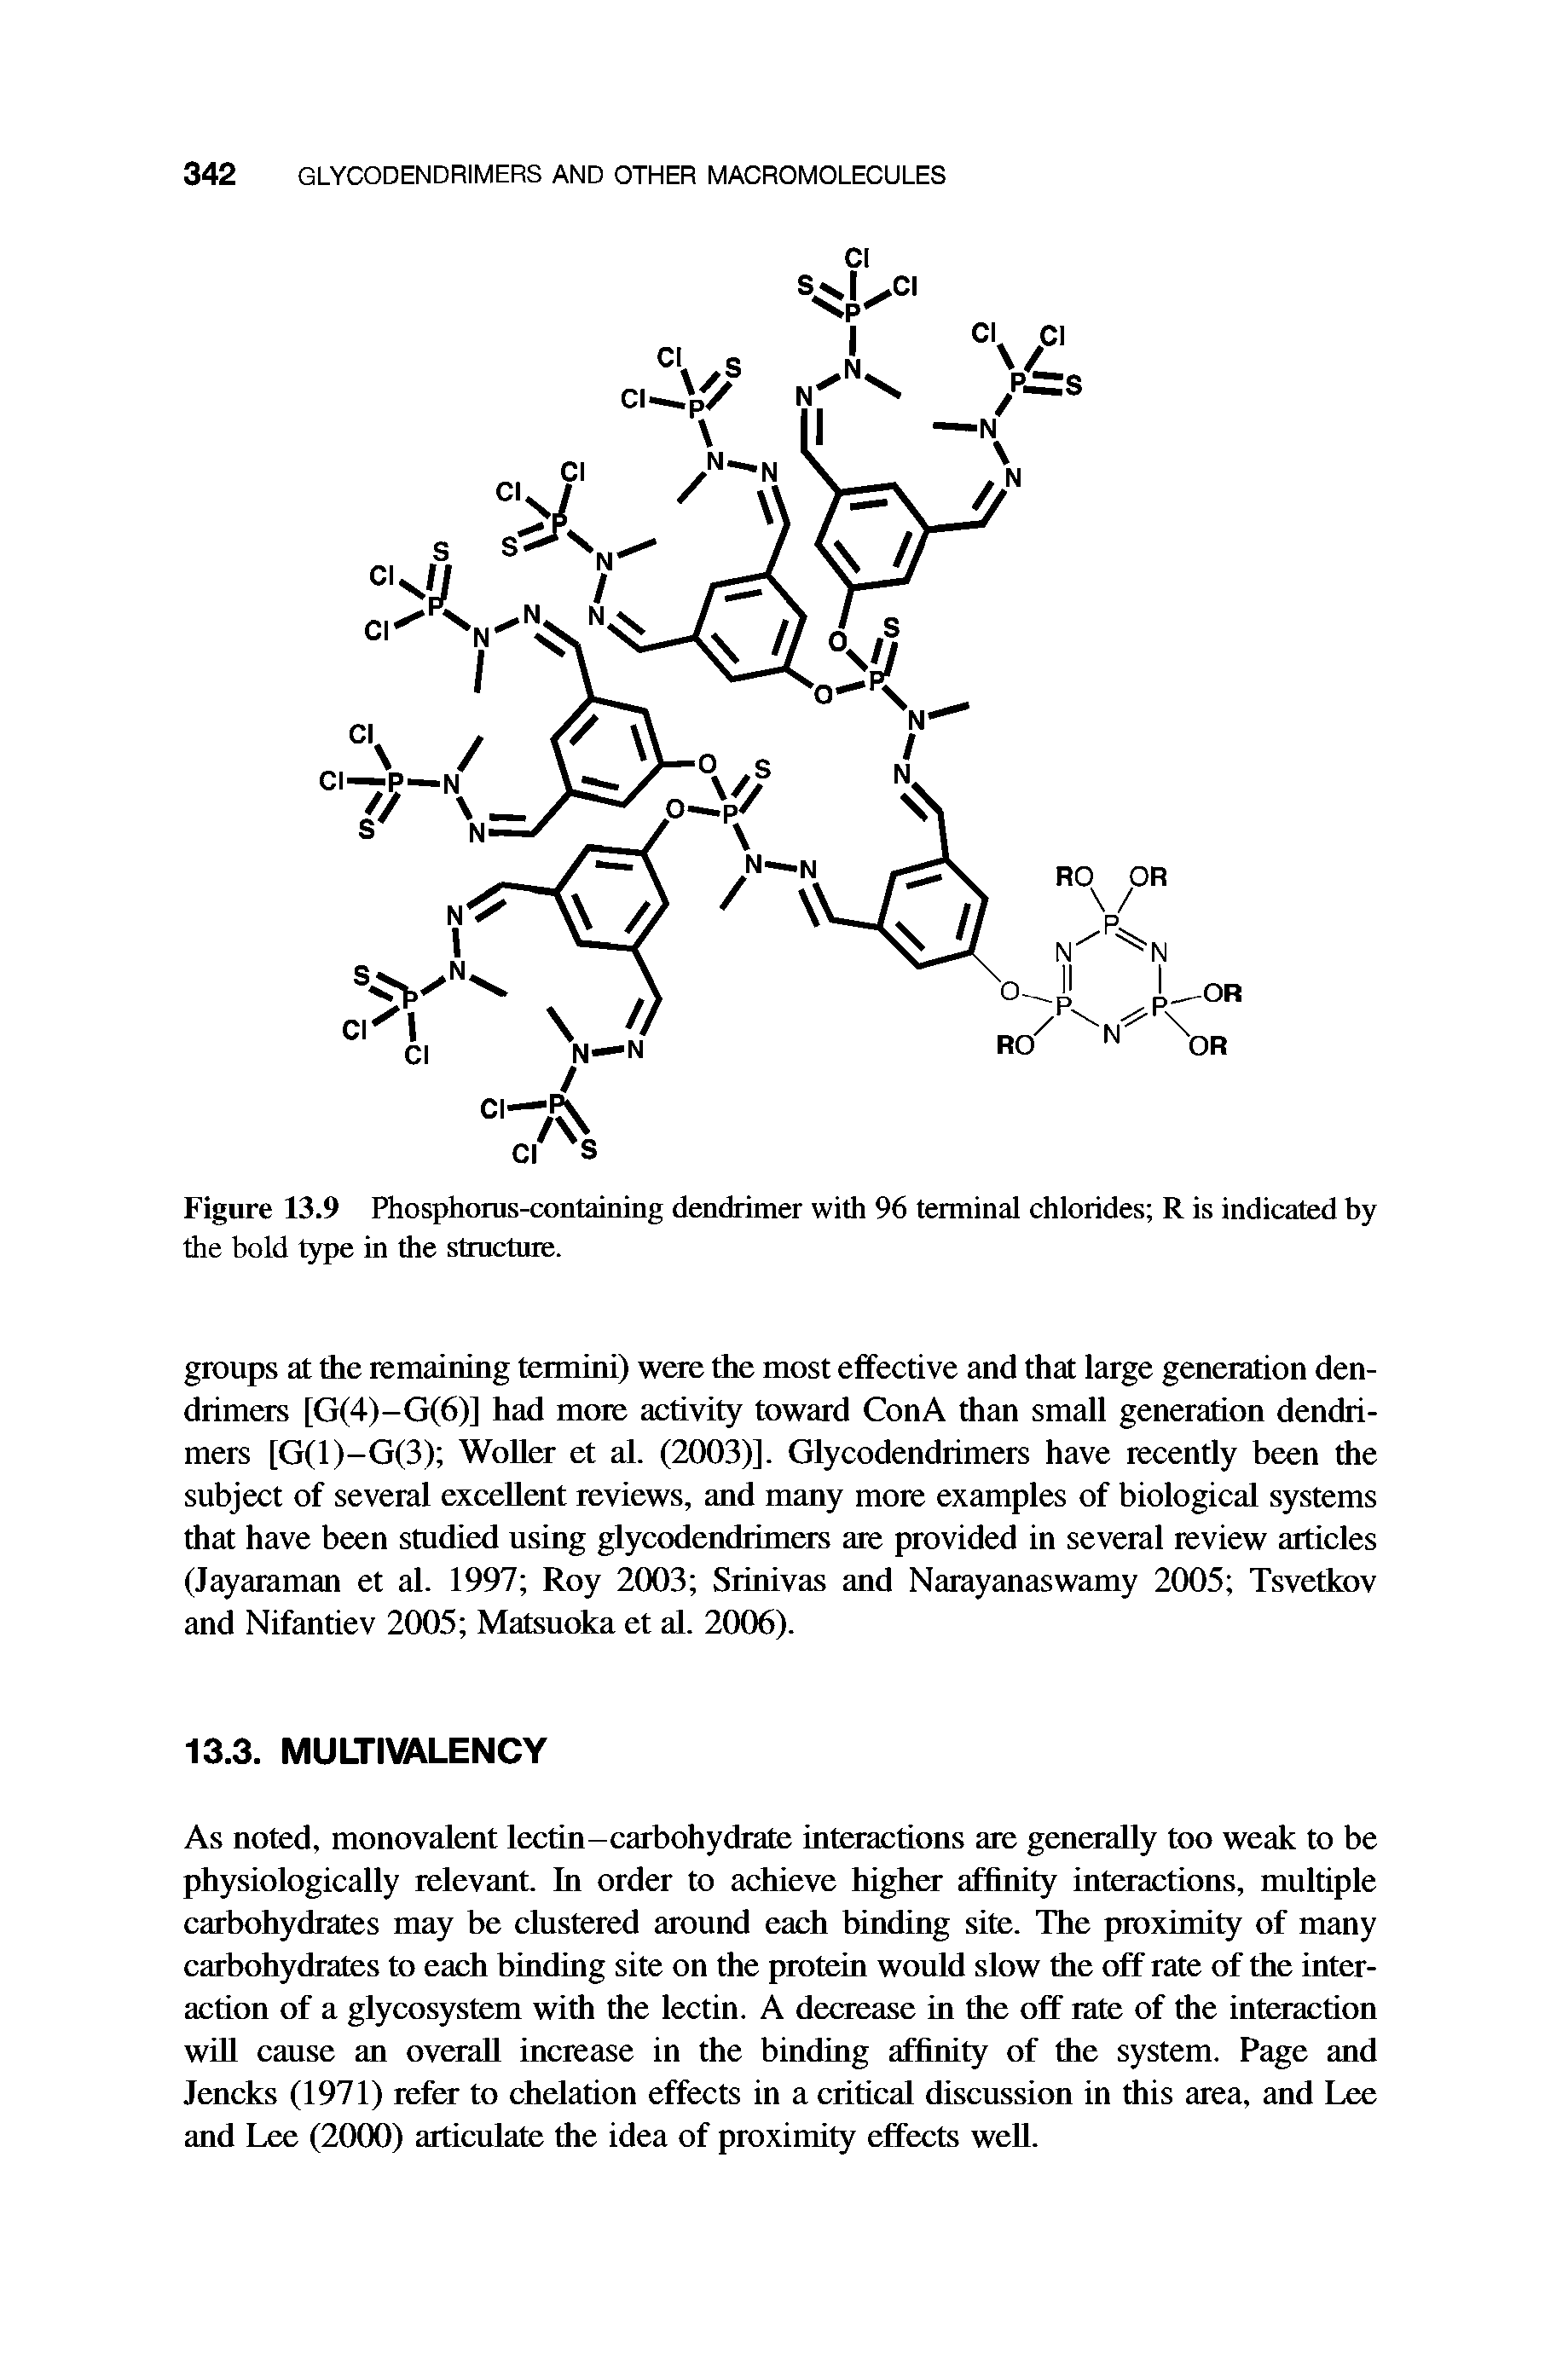 Figure 13.9 Phosphorus-containing dendrimer with 96 terminal chlorides R is indicated by the bold type in the structure.